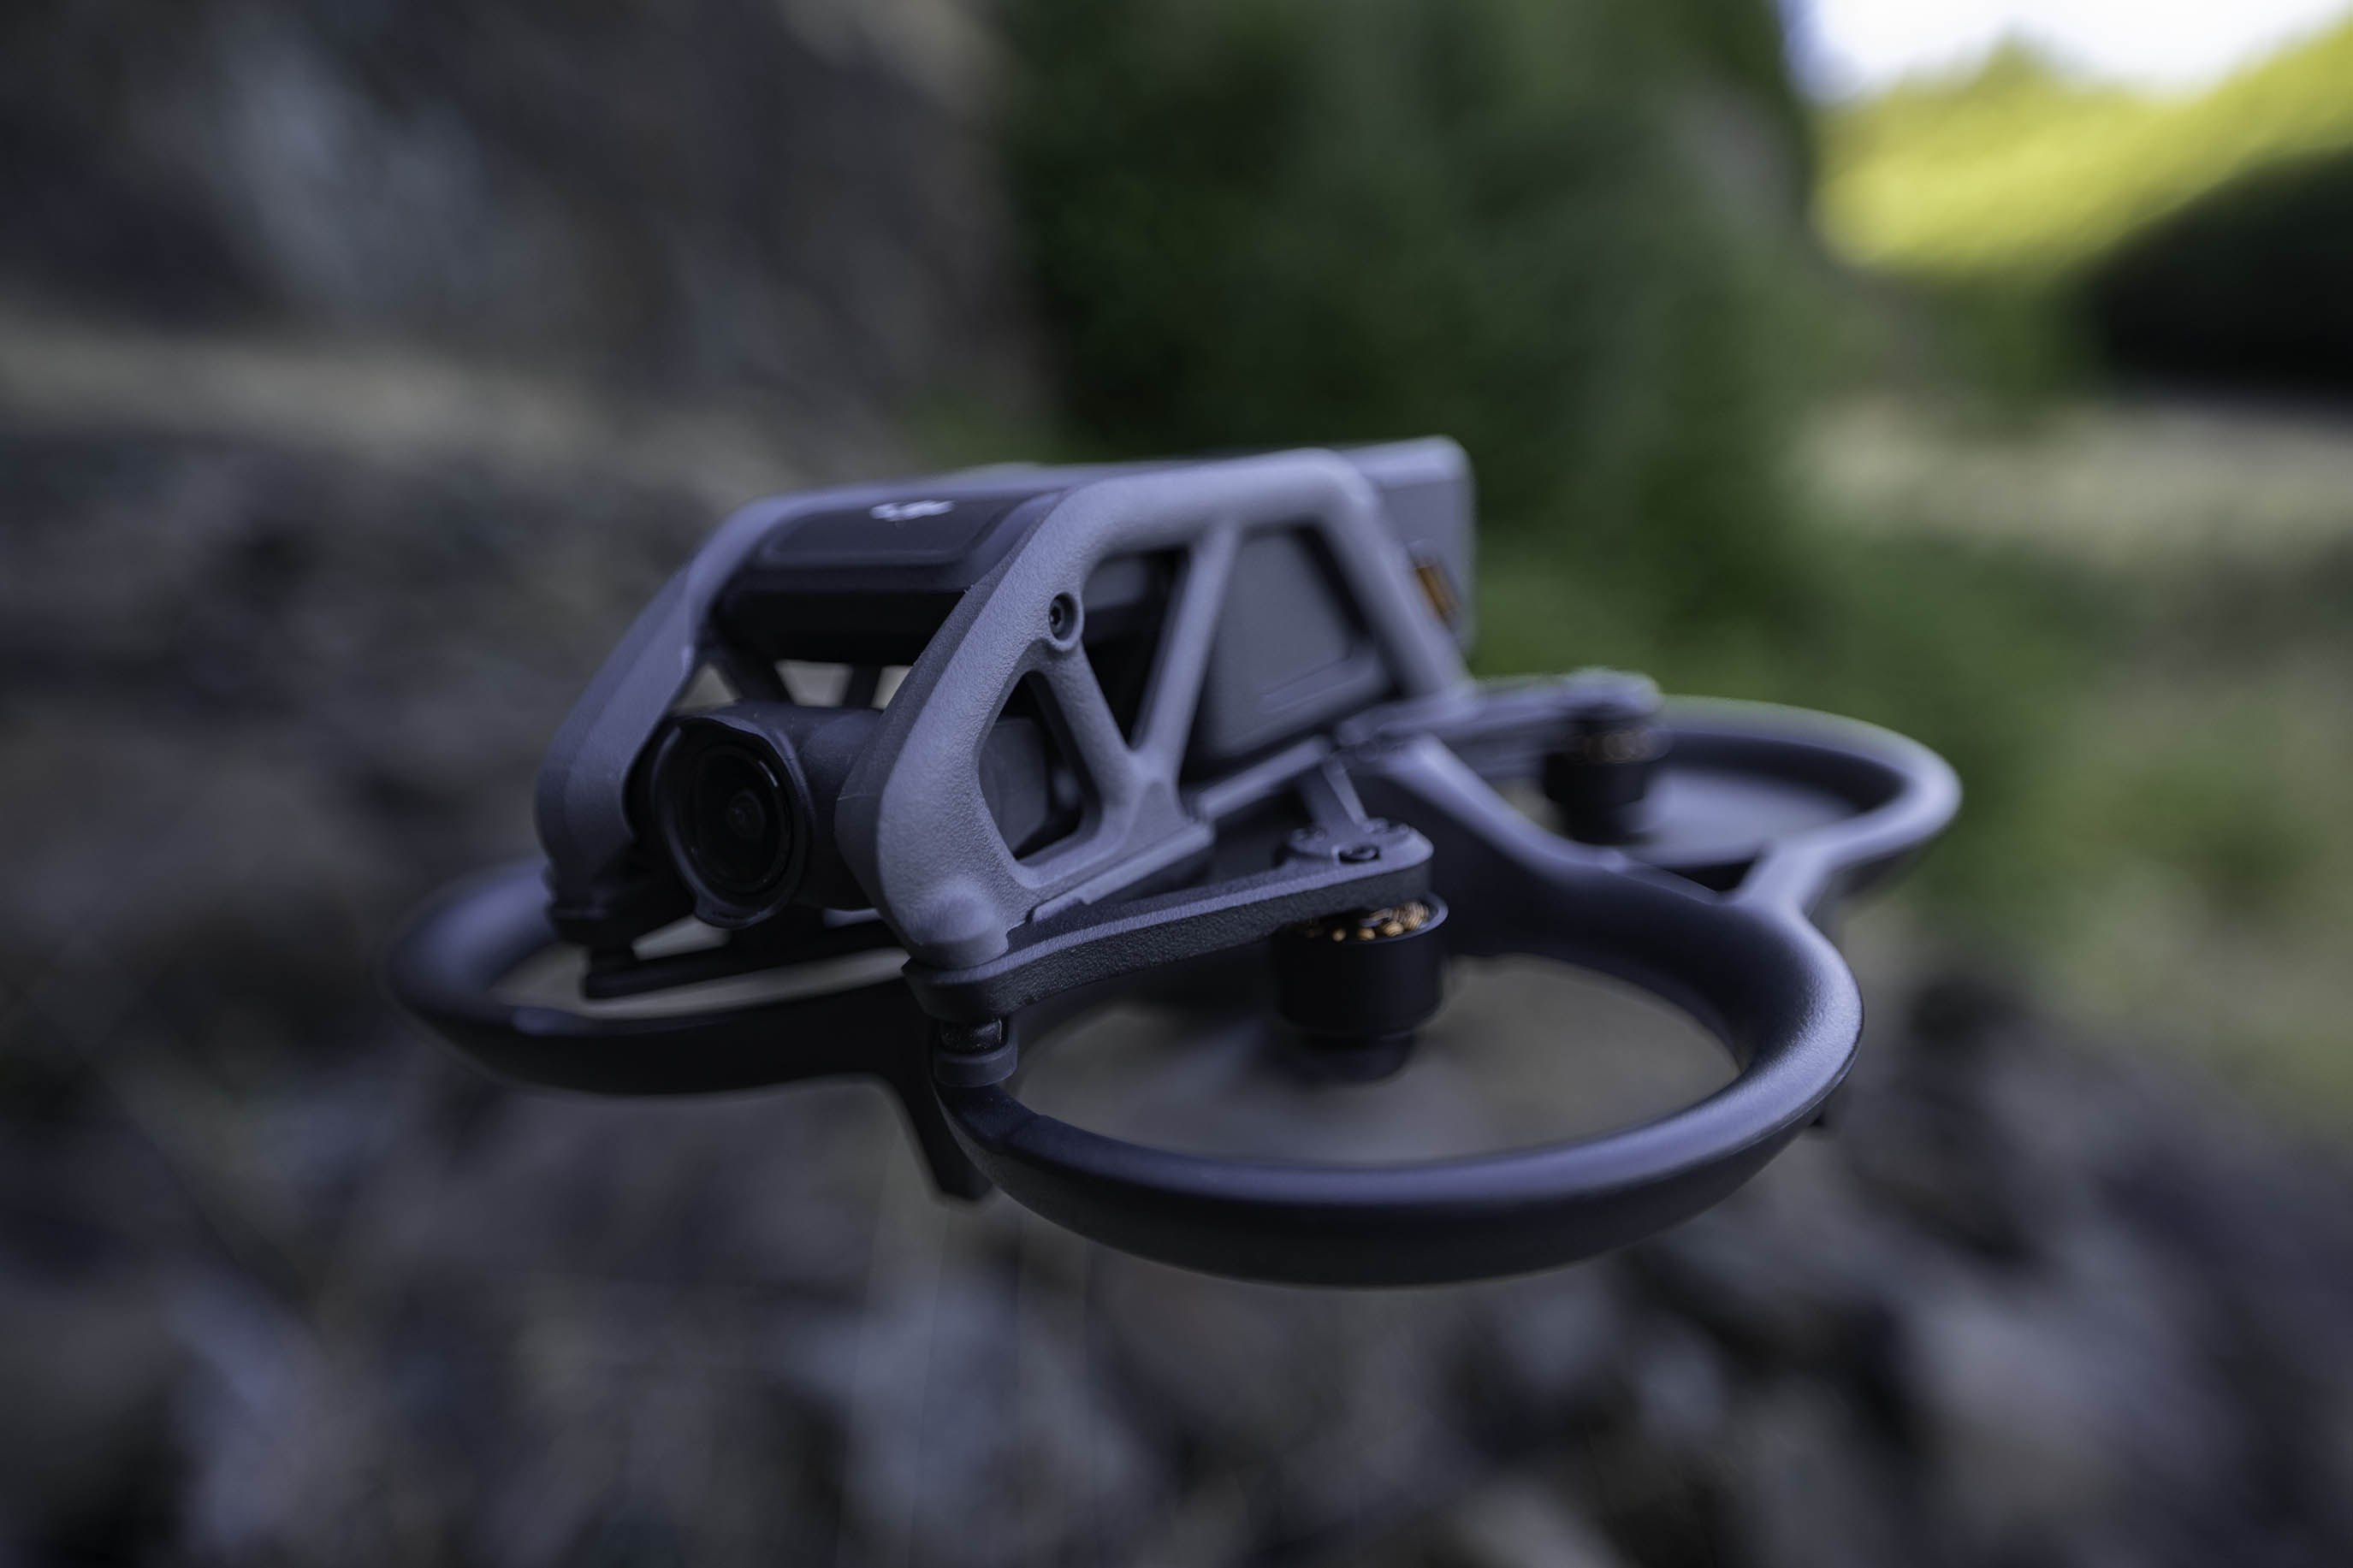 DJI Avata Review: A Durable, Easy-to-Fly, Entry-Level FPV Drone